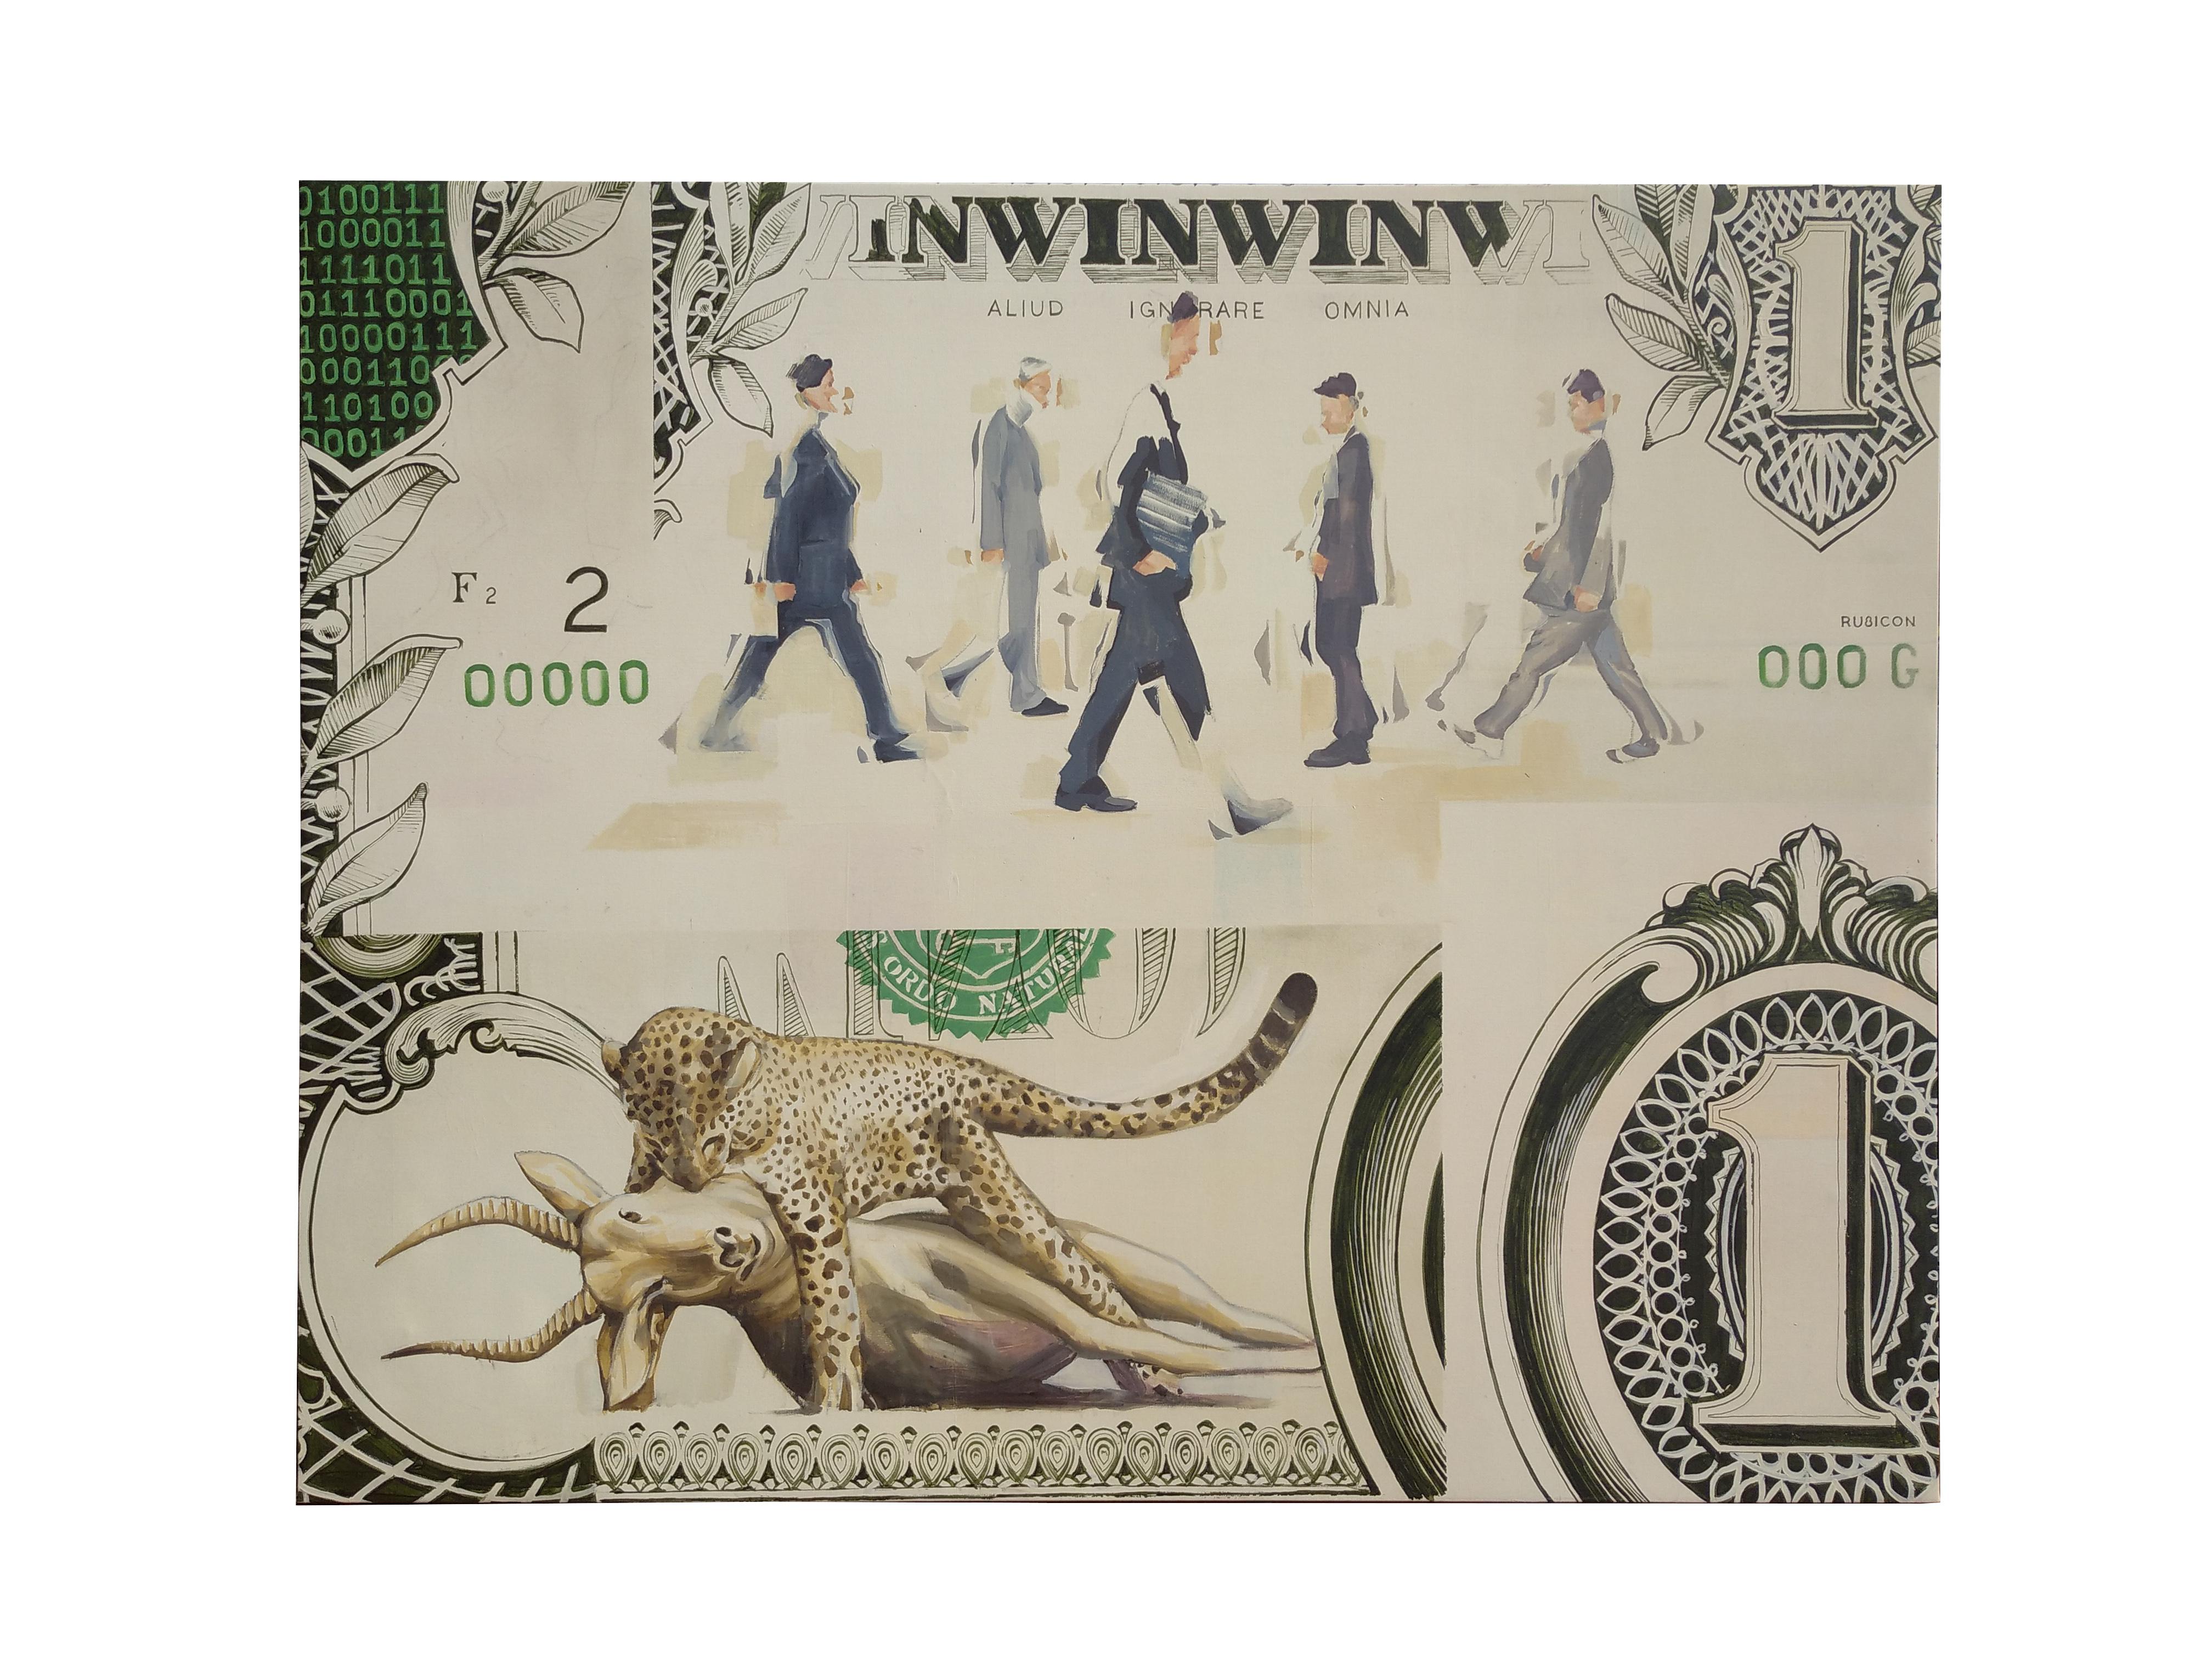 Oil and acrylic on canvas; earthy tones, olive green, kelly green, gray, stone gray, stone blue, navy, black, ecru, gold; businessmen, Wall Street, financial district, cheetah and gazelle, predator and prey

From RU8ICON1's latest series,